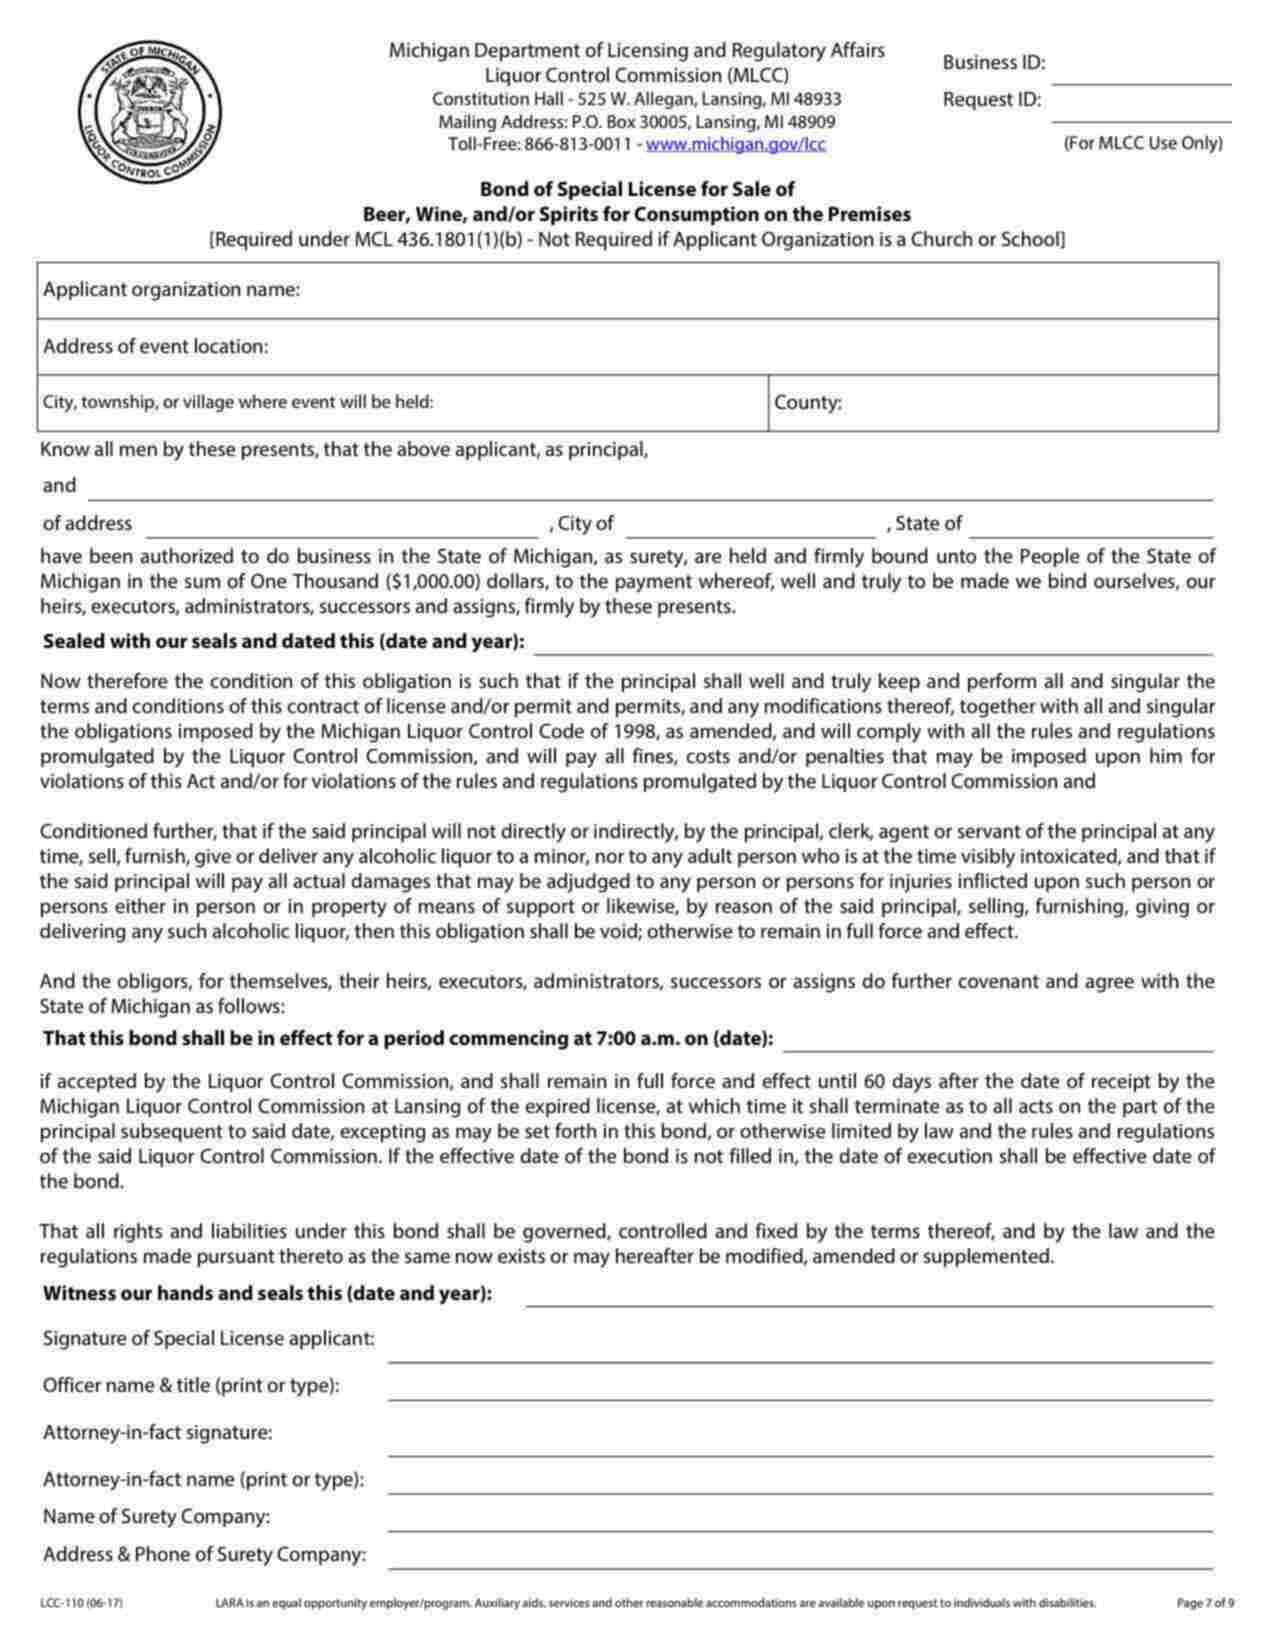 Michigan Special License for Sale of Beer, Wine & Spirits for Consumption on the Premises (One Day) Bond Form